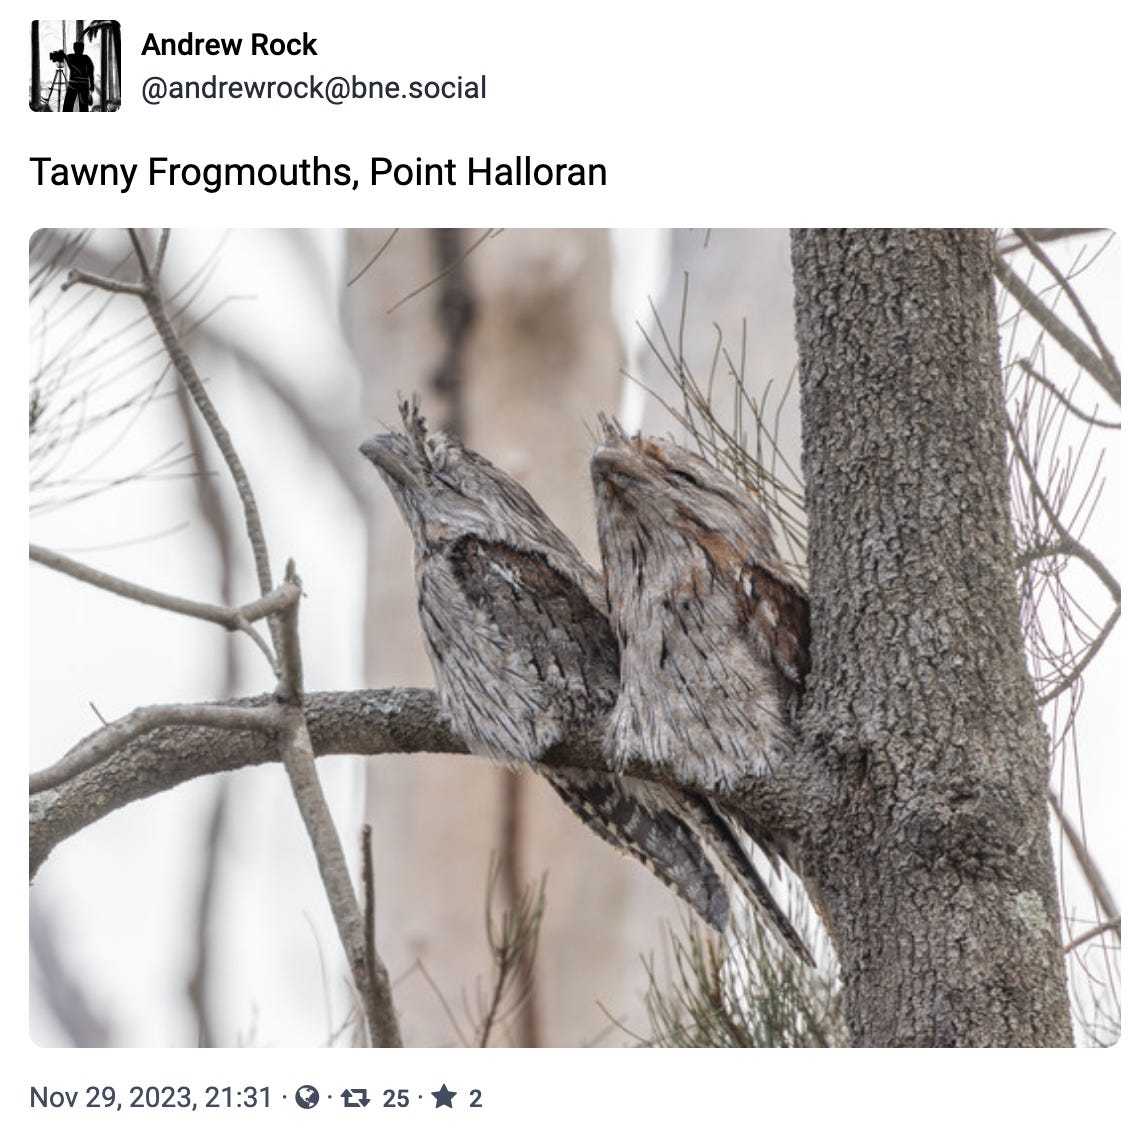 Tawny Frogmouths, Point Halloran